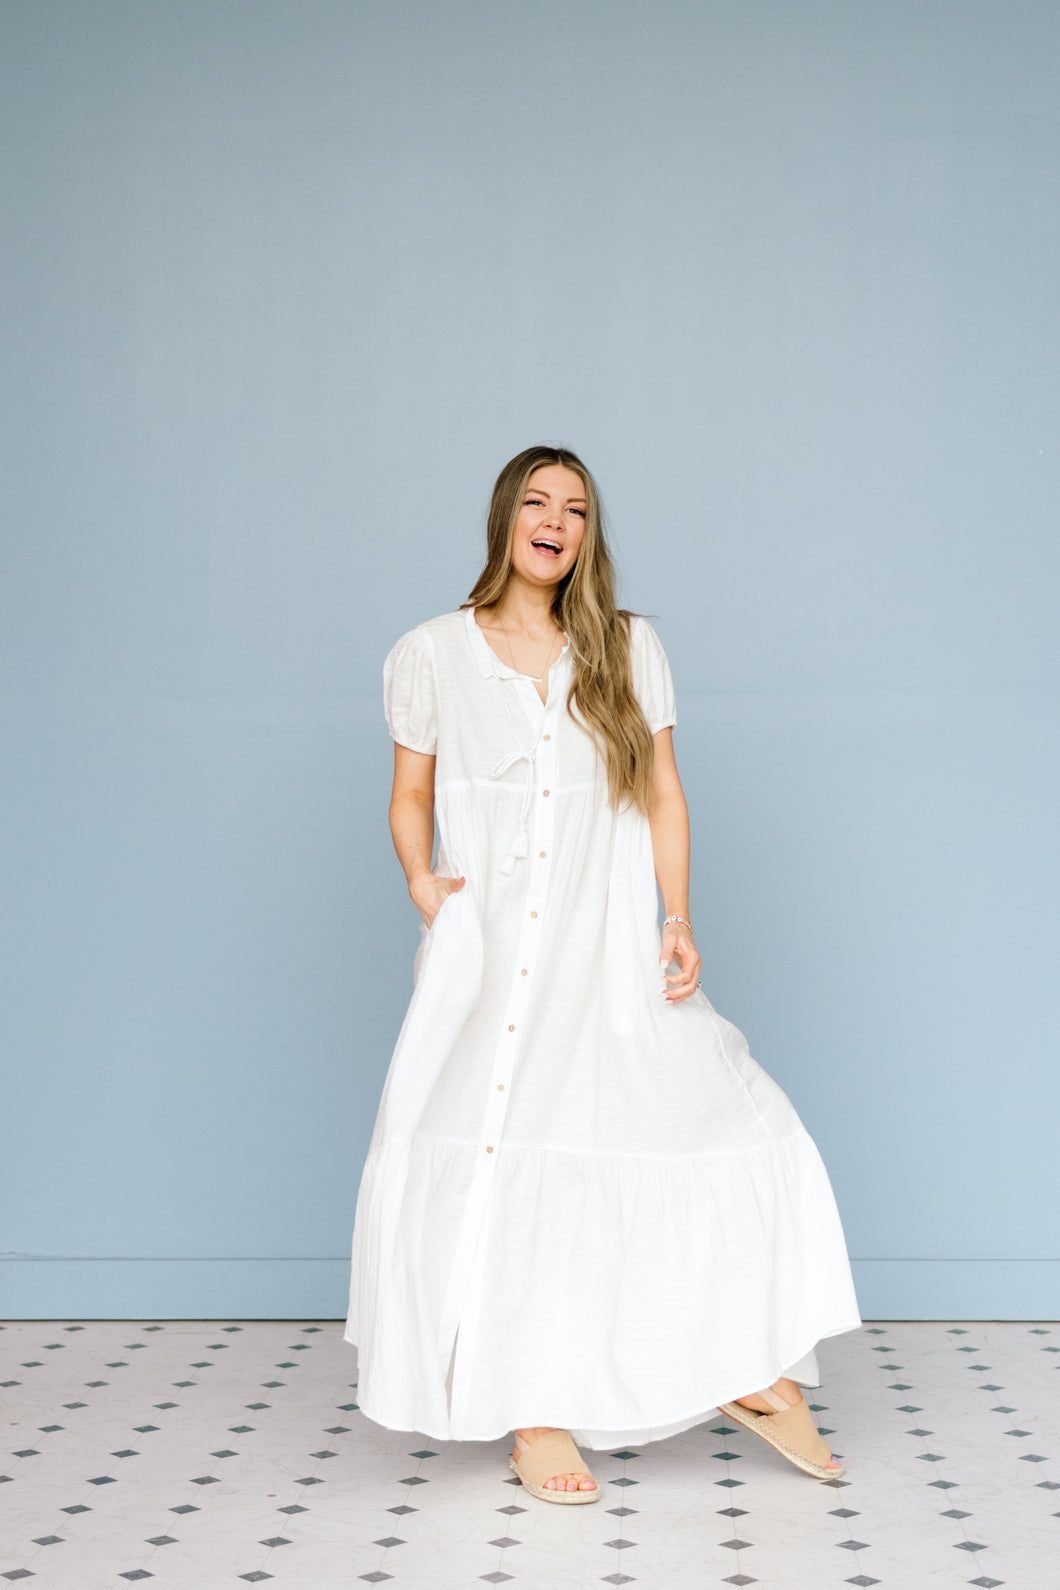 Turks and Caicos Button Down Maxi Dress in White